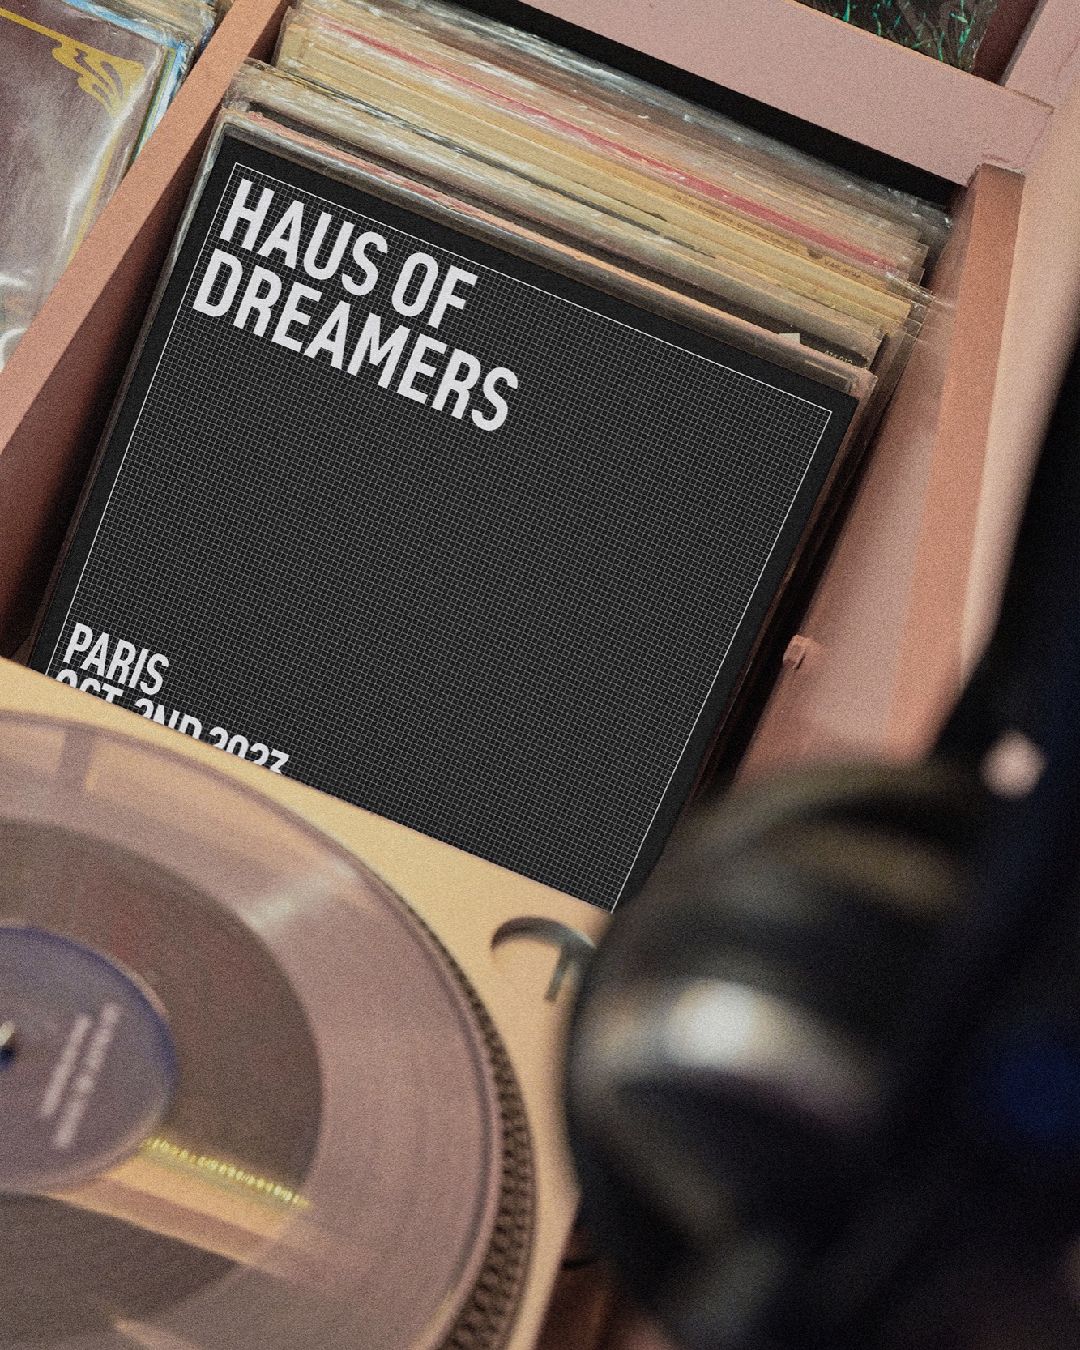 Golden Goose lands in Paris with HAUS of Dreamers Skate, fashion and culture in a unique framing 